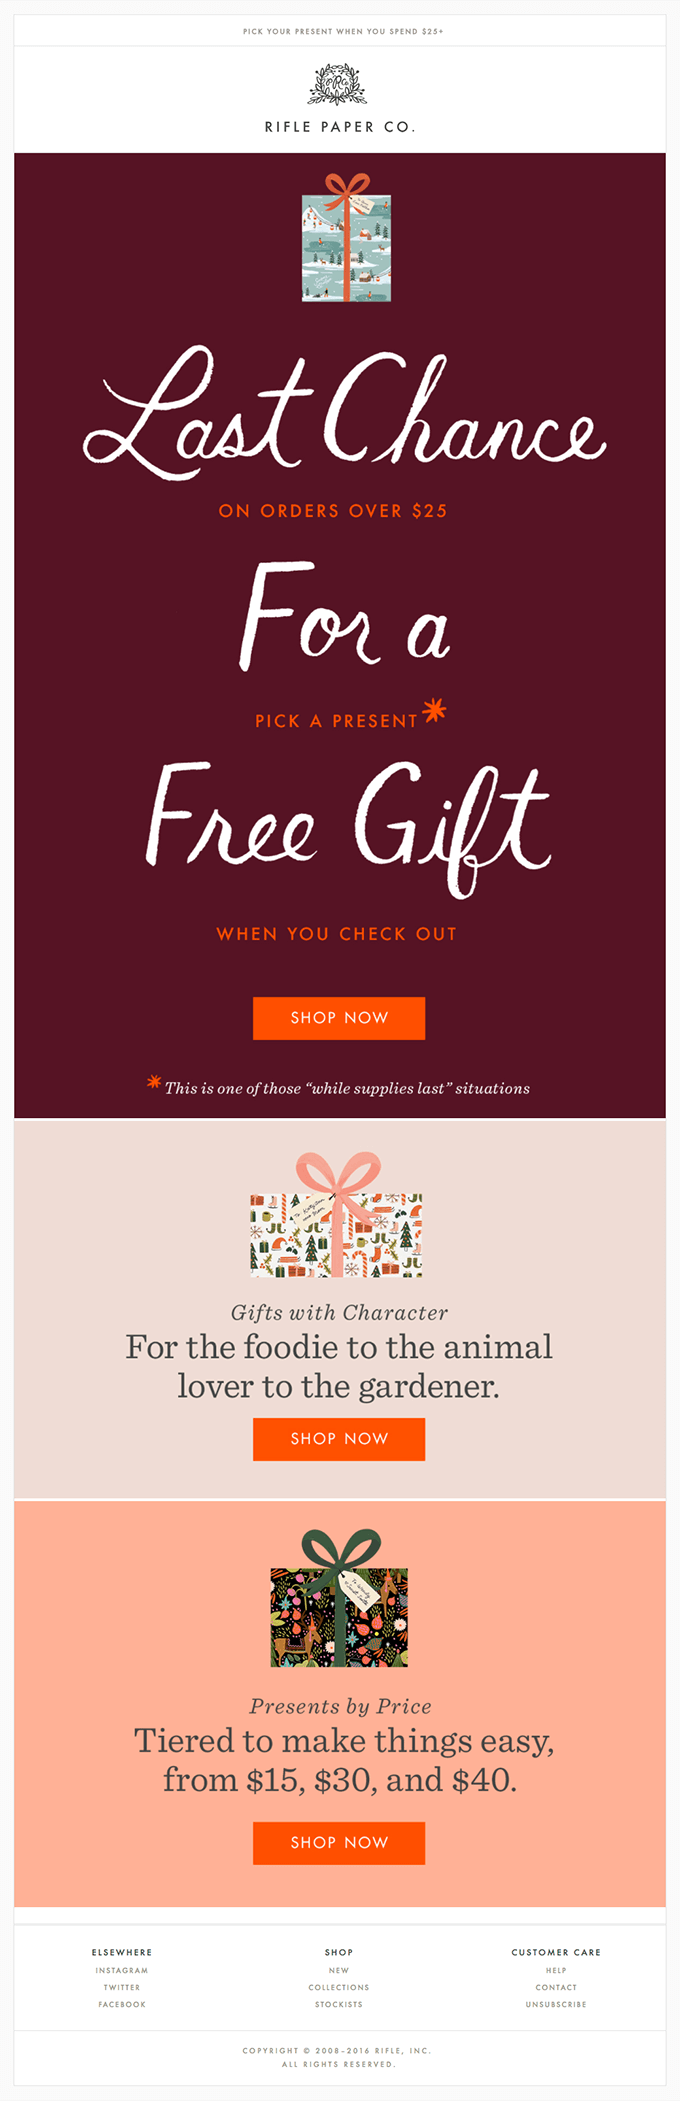 Rifle-Paper-Co-Free-Gift